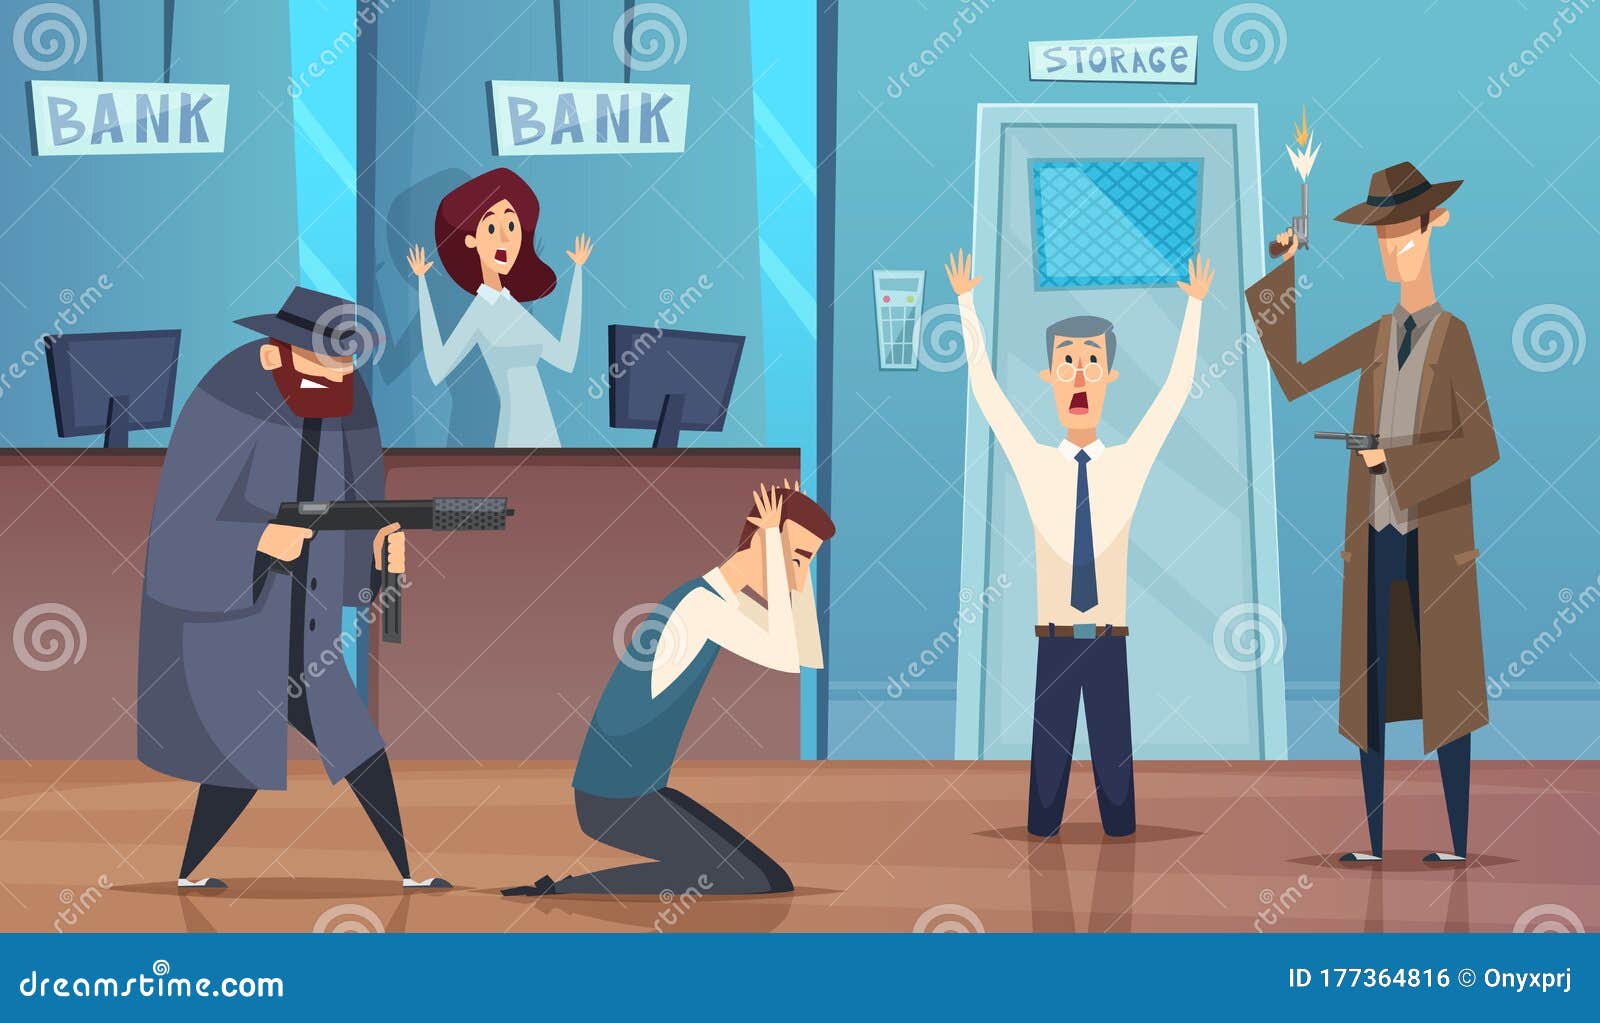 Robbery In Bank With Hostages Vector Illustration